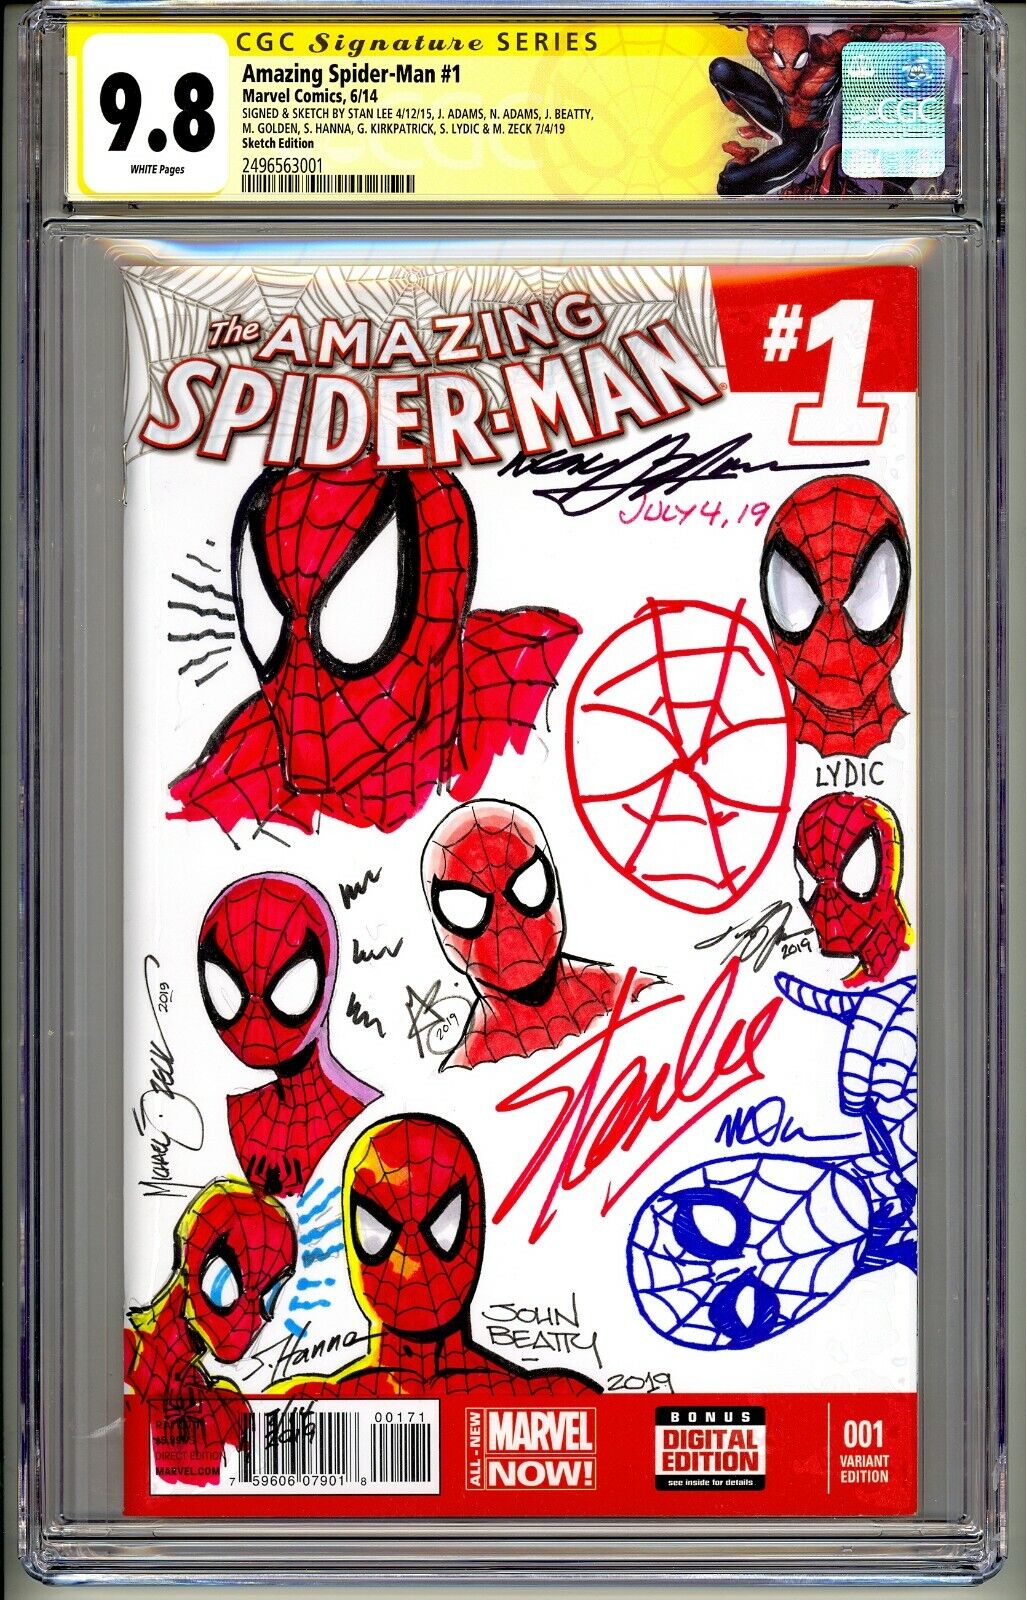 💥AMAZING SPIDER-MAN #1 CGC SS 9.8 SIGNED & SKETCHED STAN LEE & 8 LEGENDS RARE💥